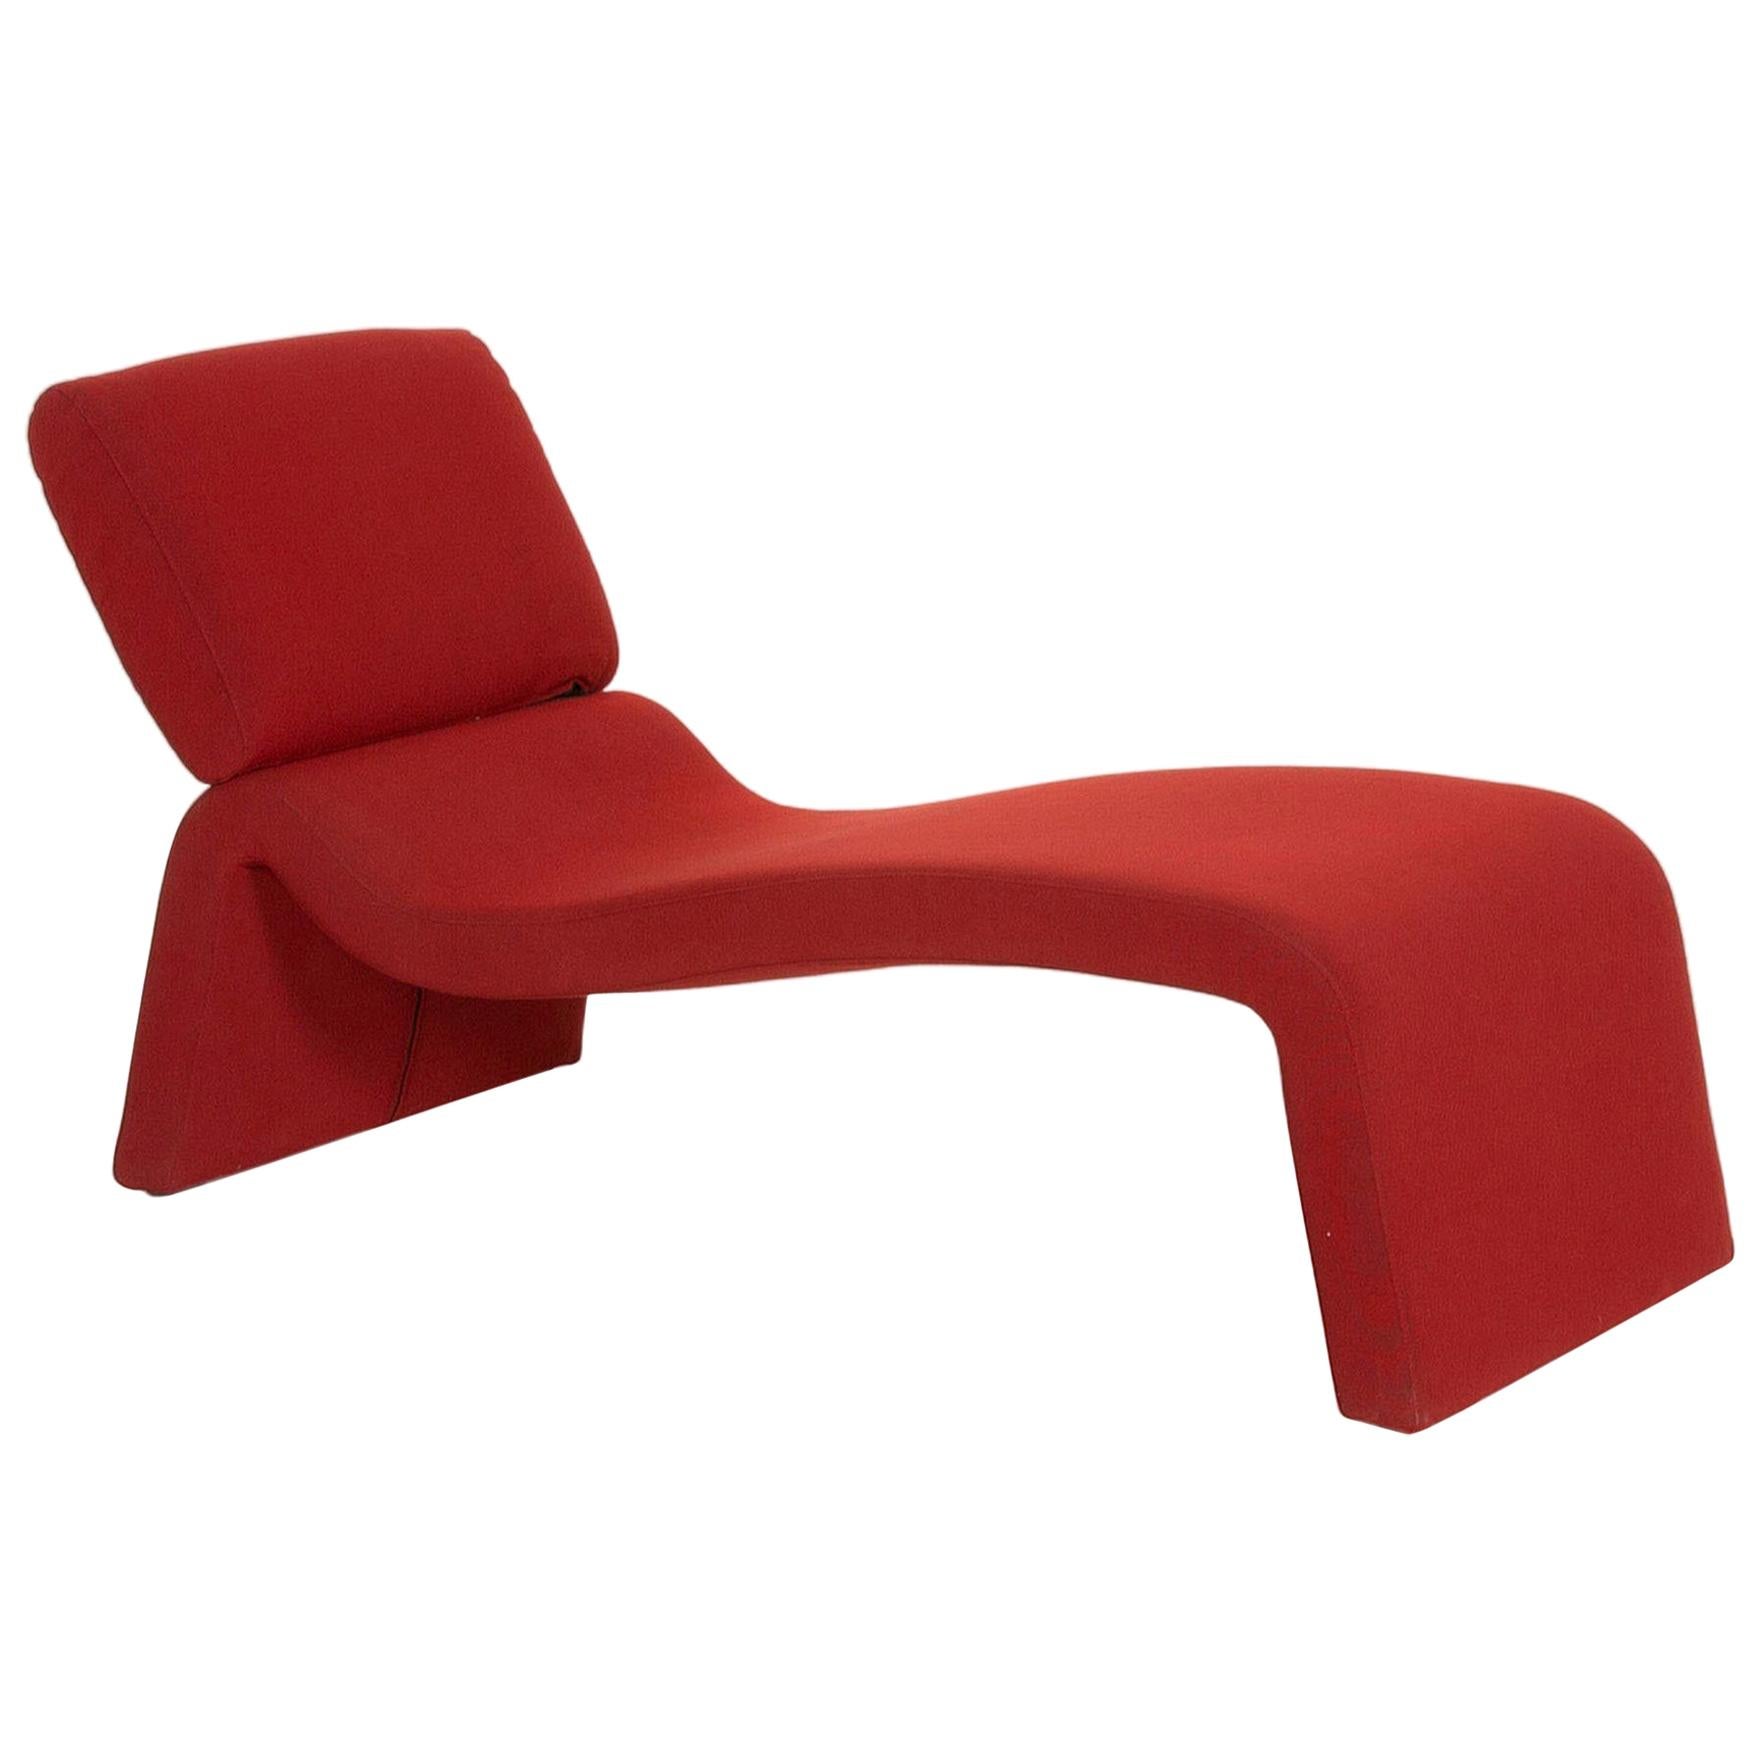 COR Onda Fabric Lounger Red For Sale